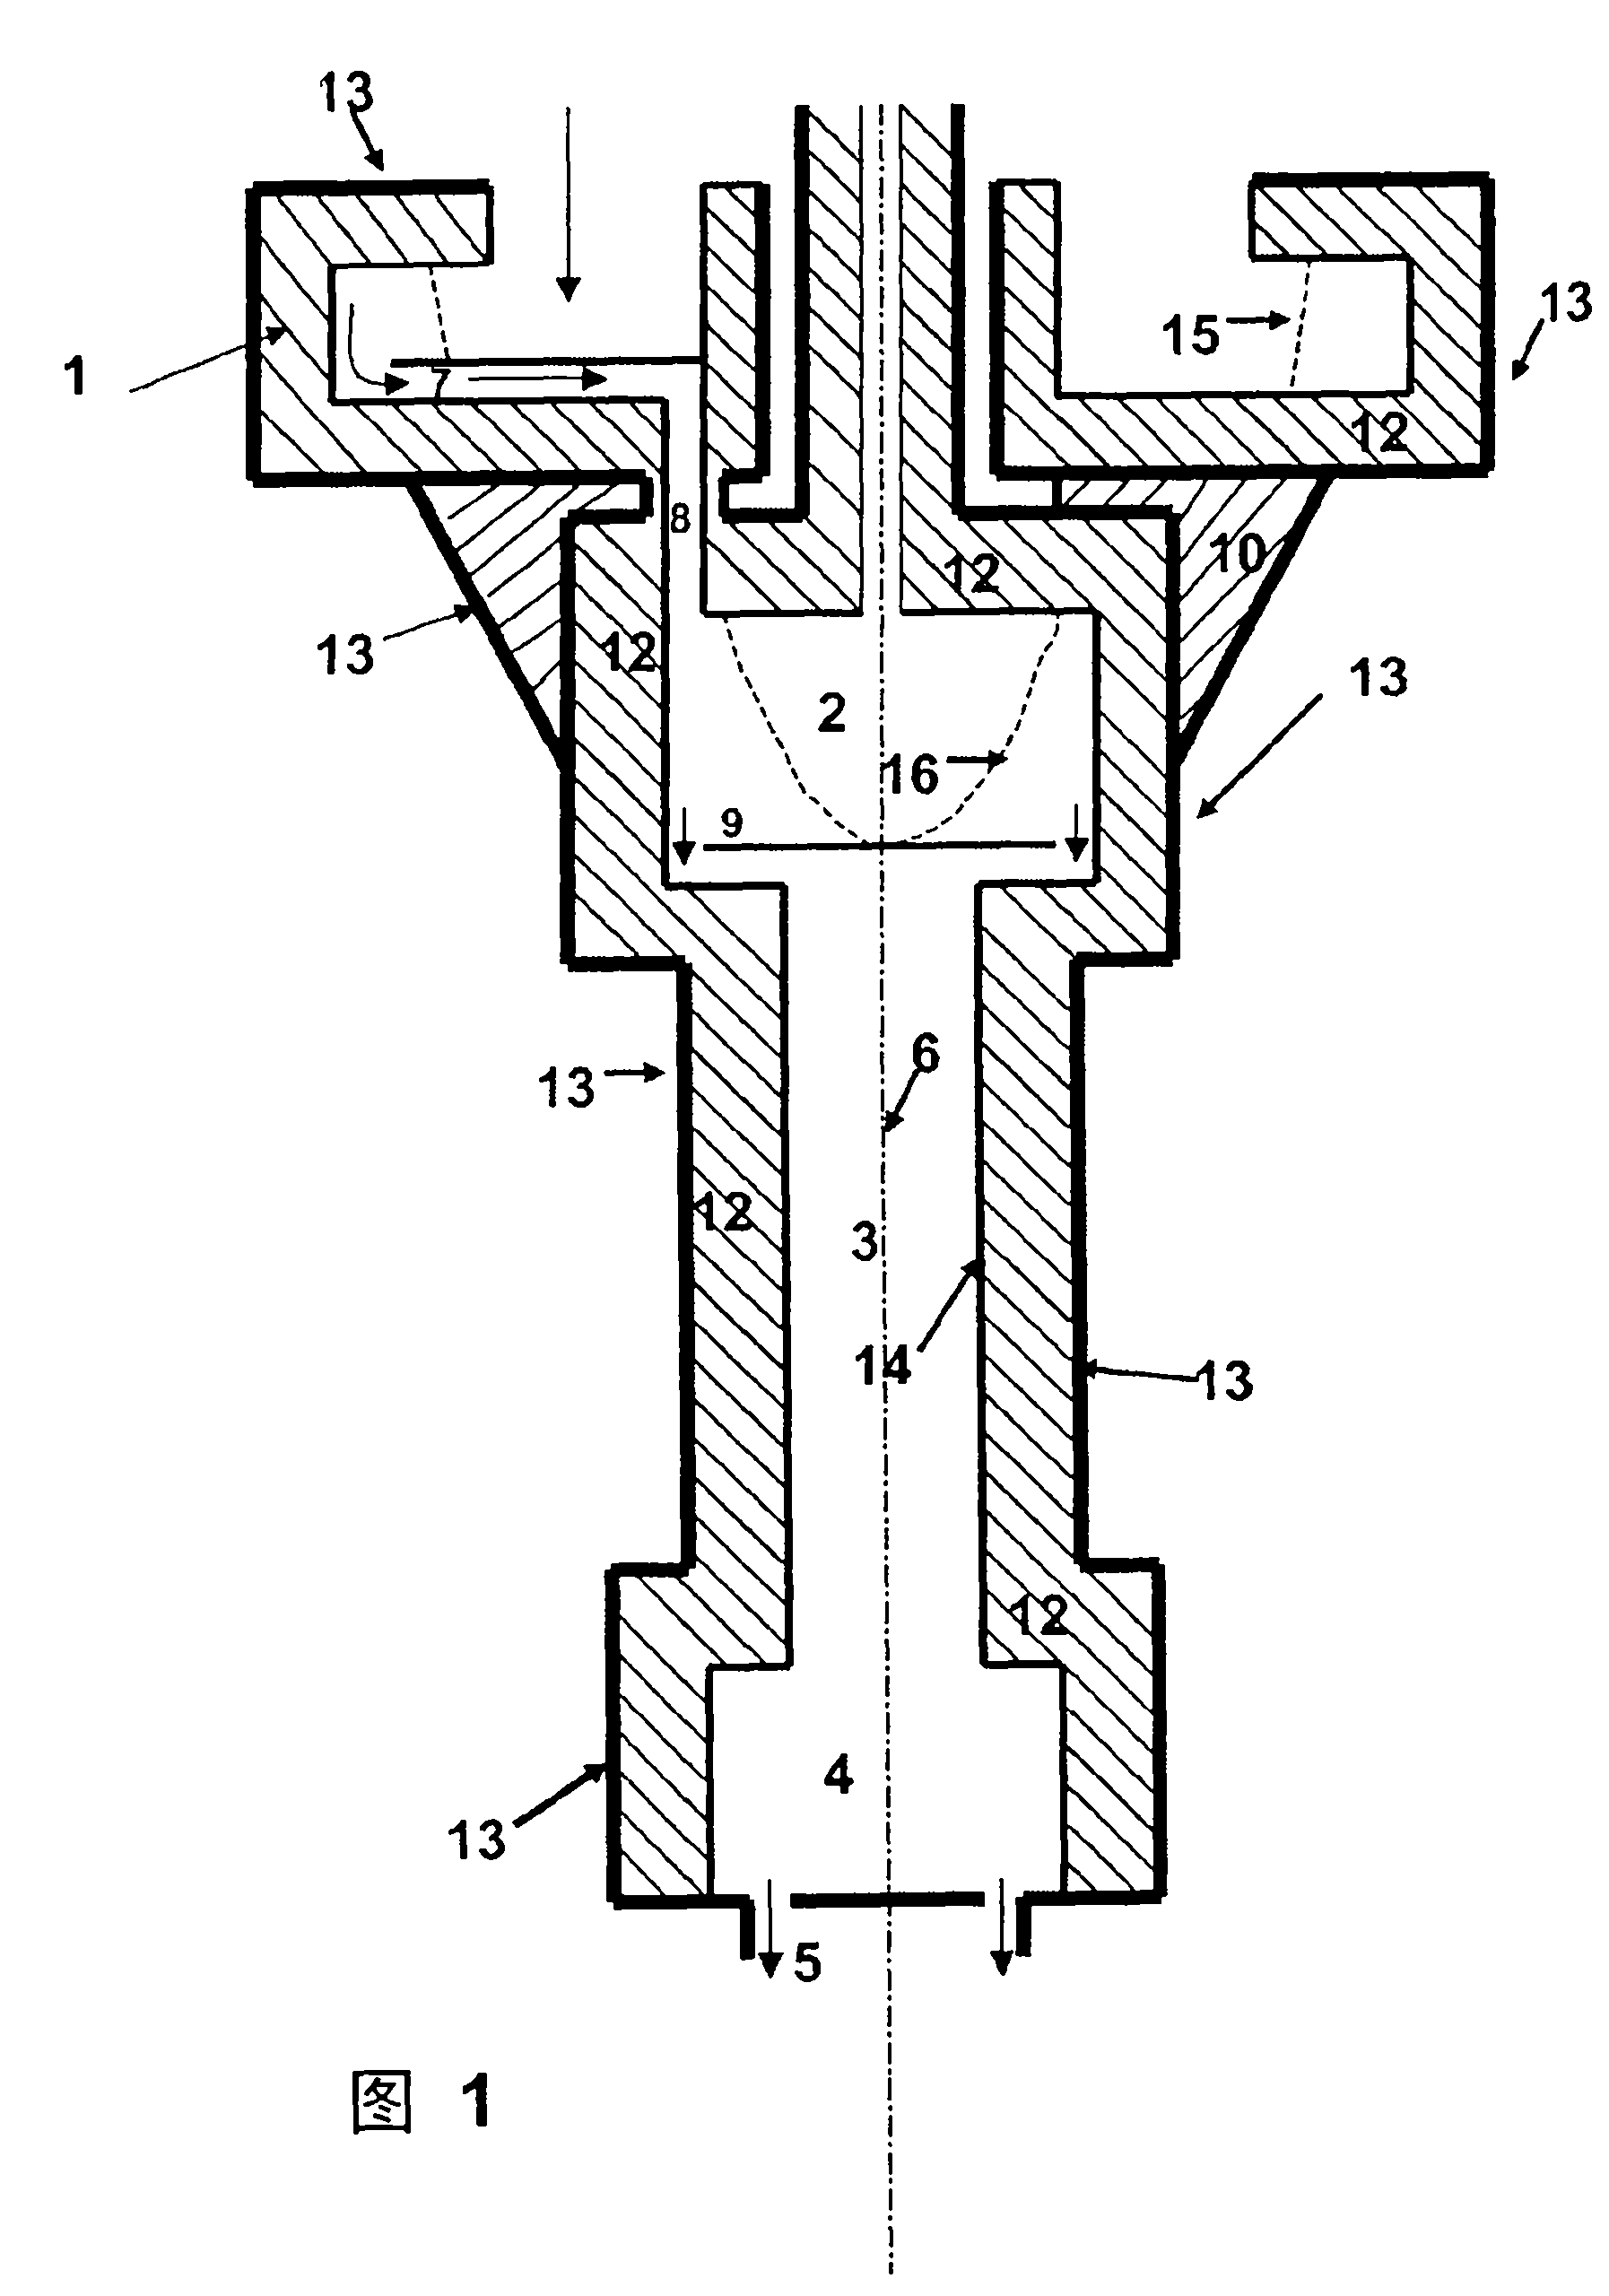 Method and device for manufacturing glass and products obtained with the aid of said method